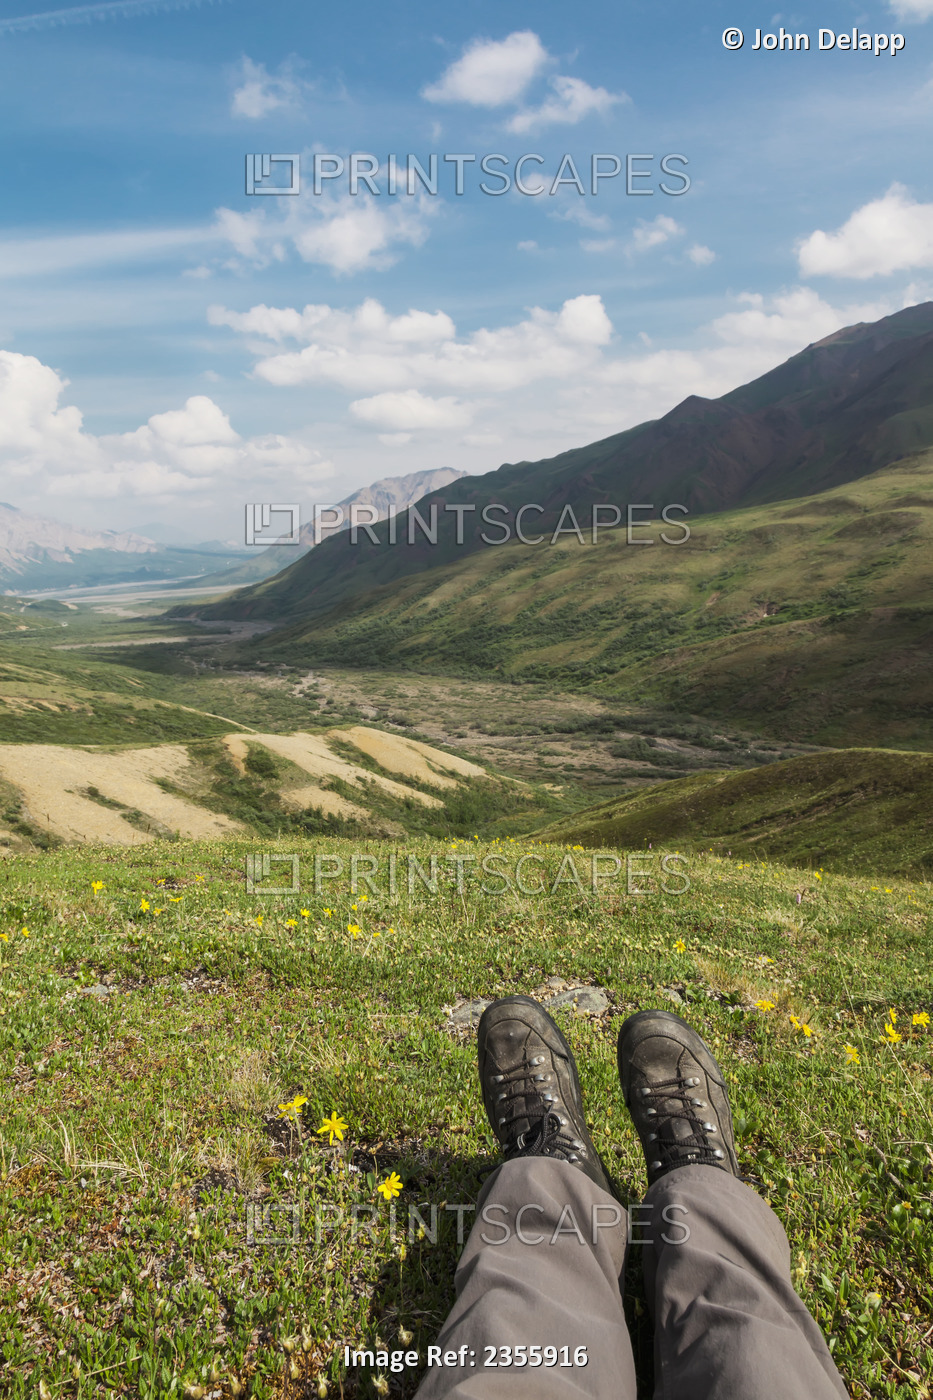 A Hiker's Boots And Lower Legs Appear In The Foreground Of A Mountain Scenic ...